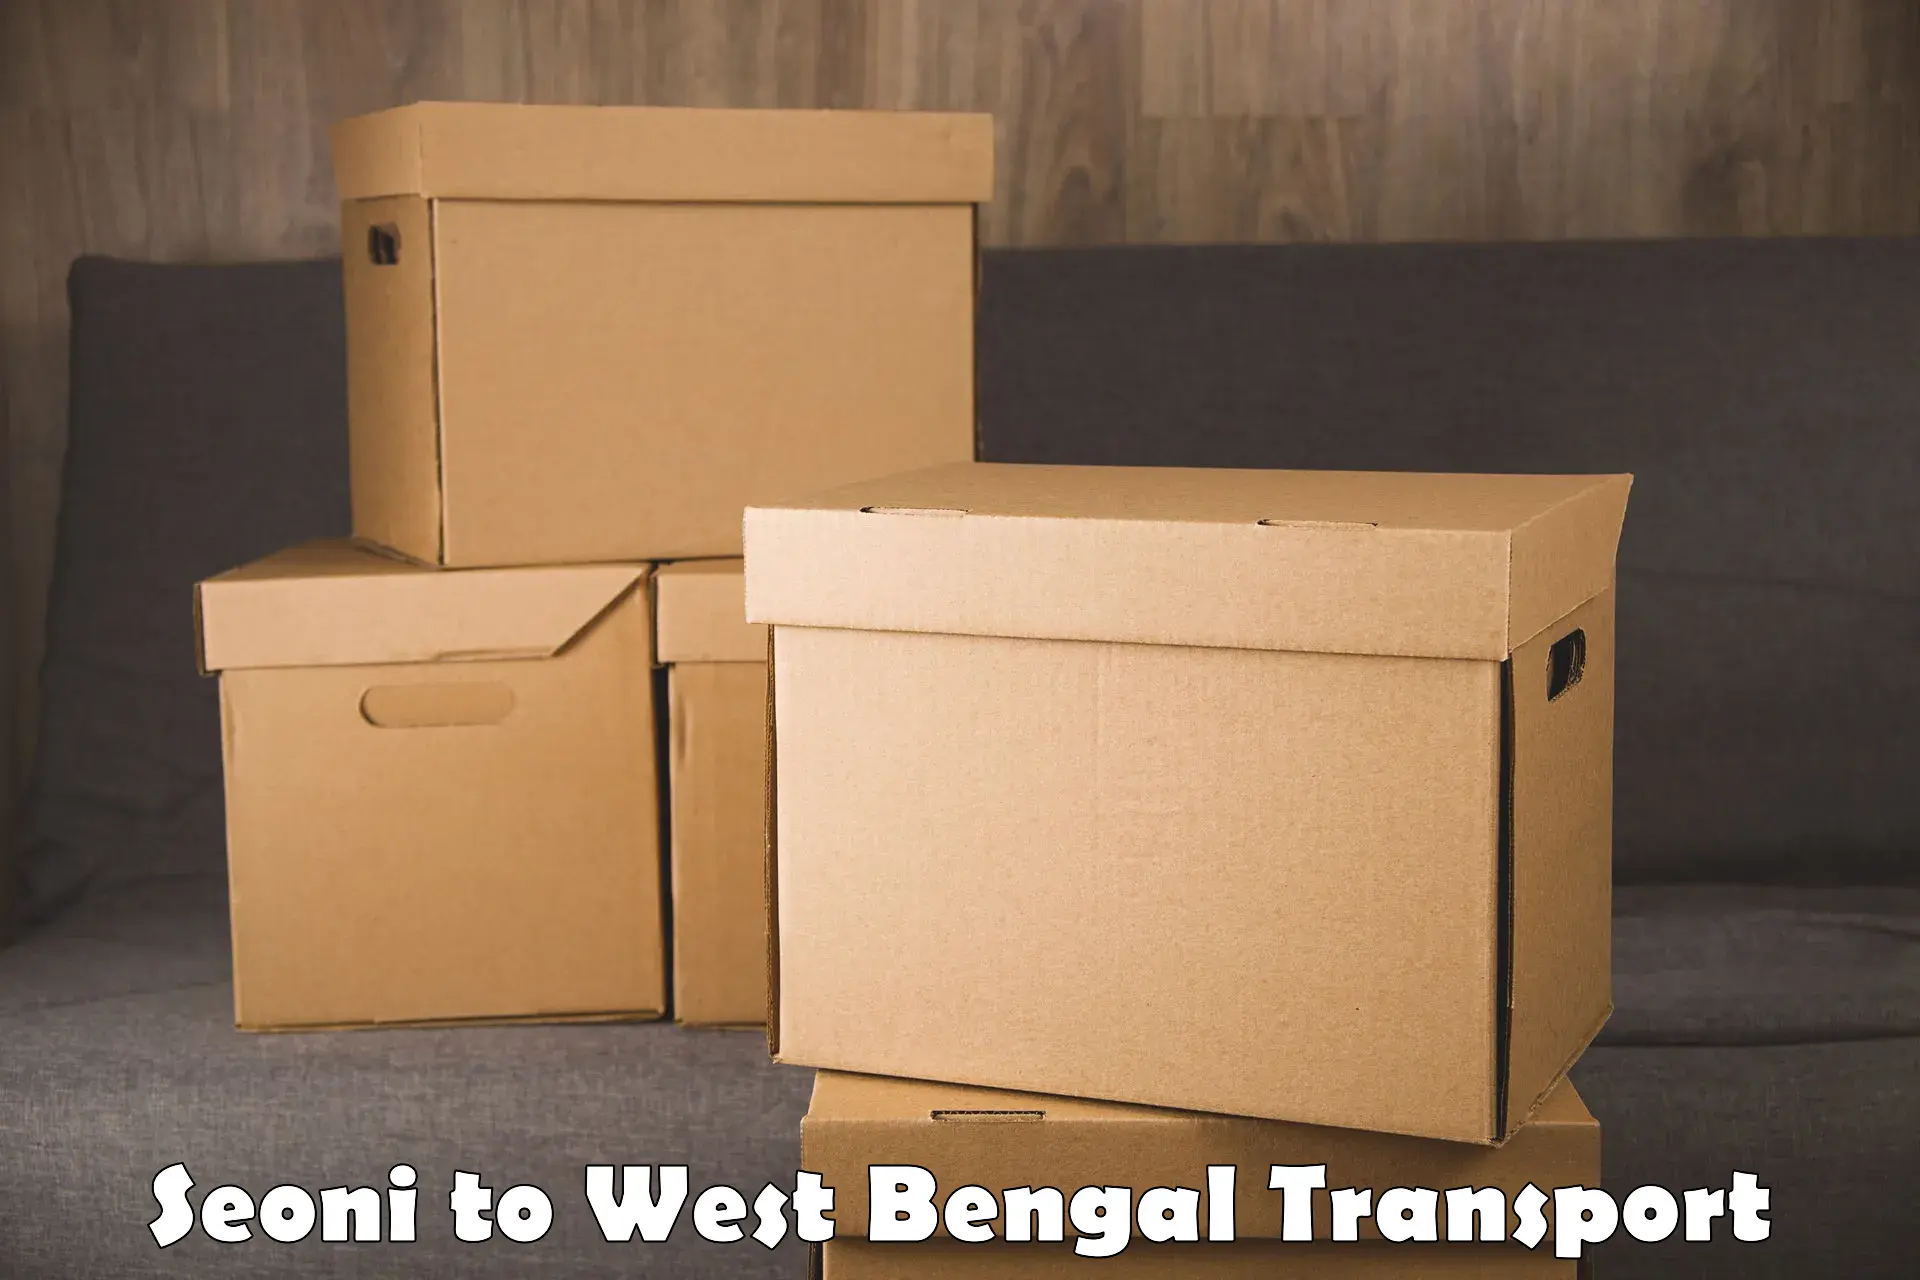 Pick up transport service Seoni to West Bengal